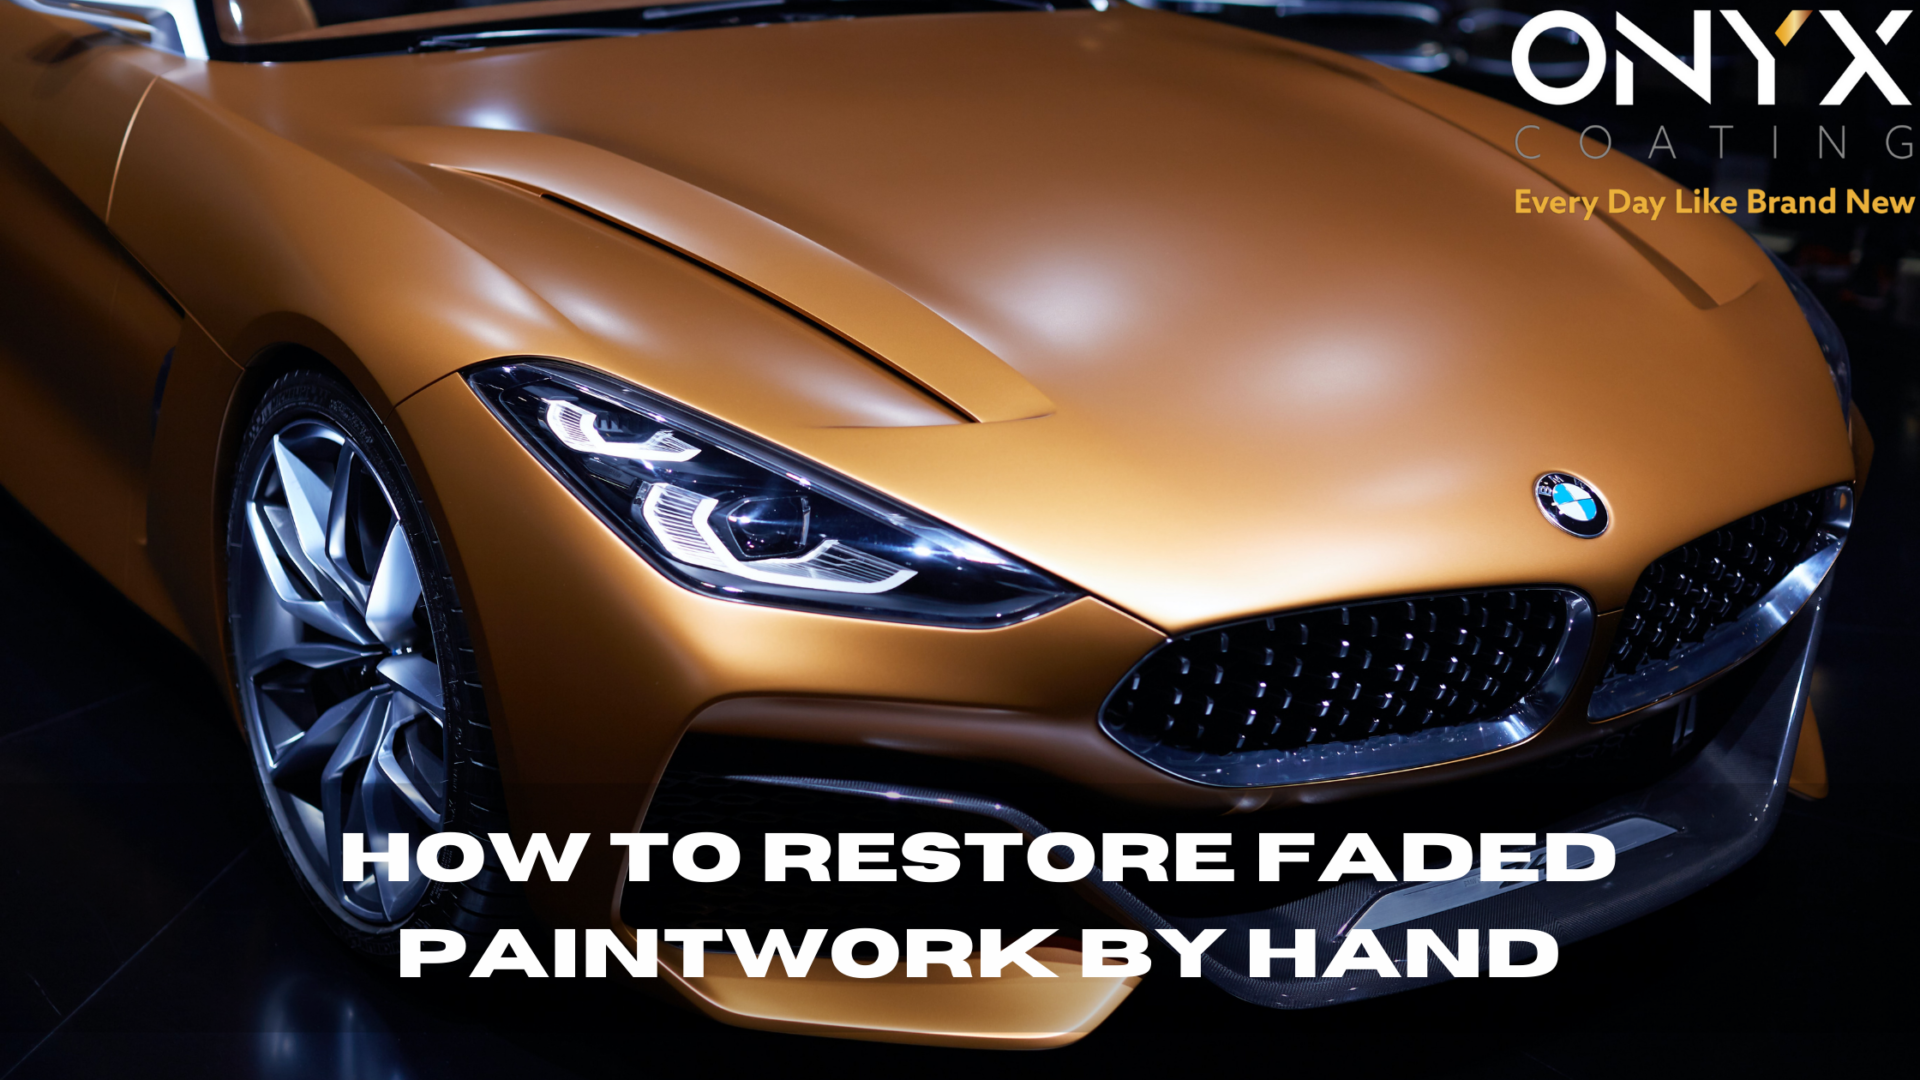 How to restore faded paintwork by hand